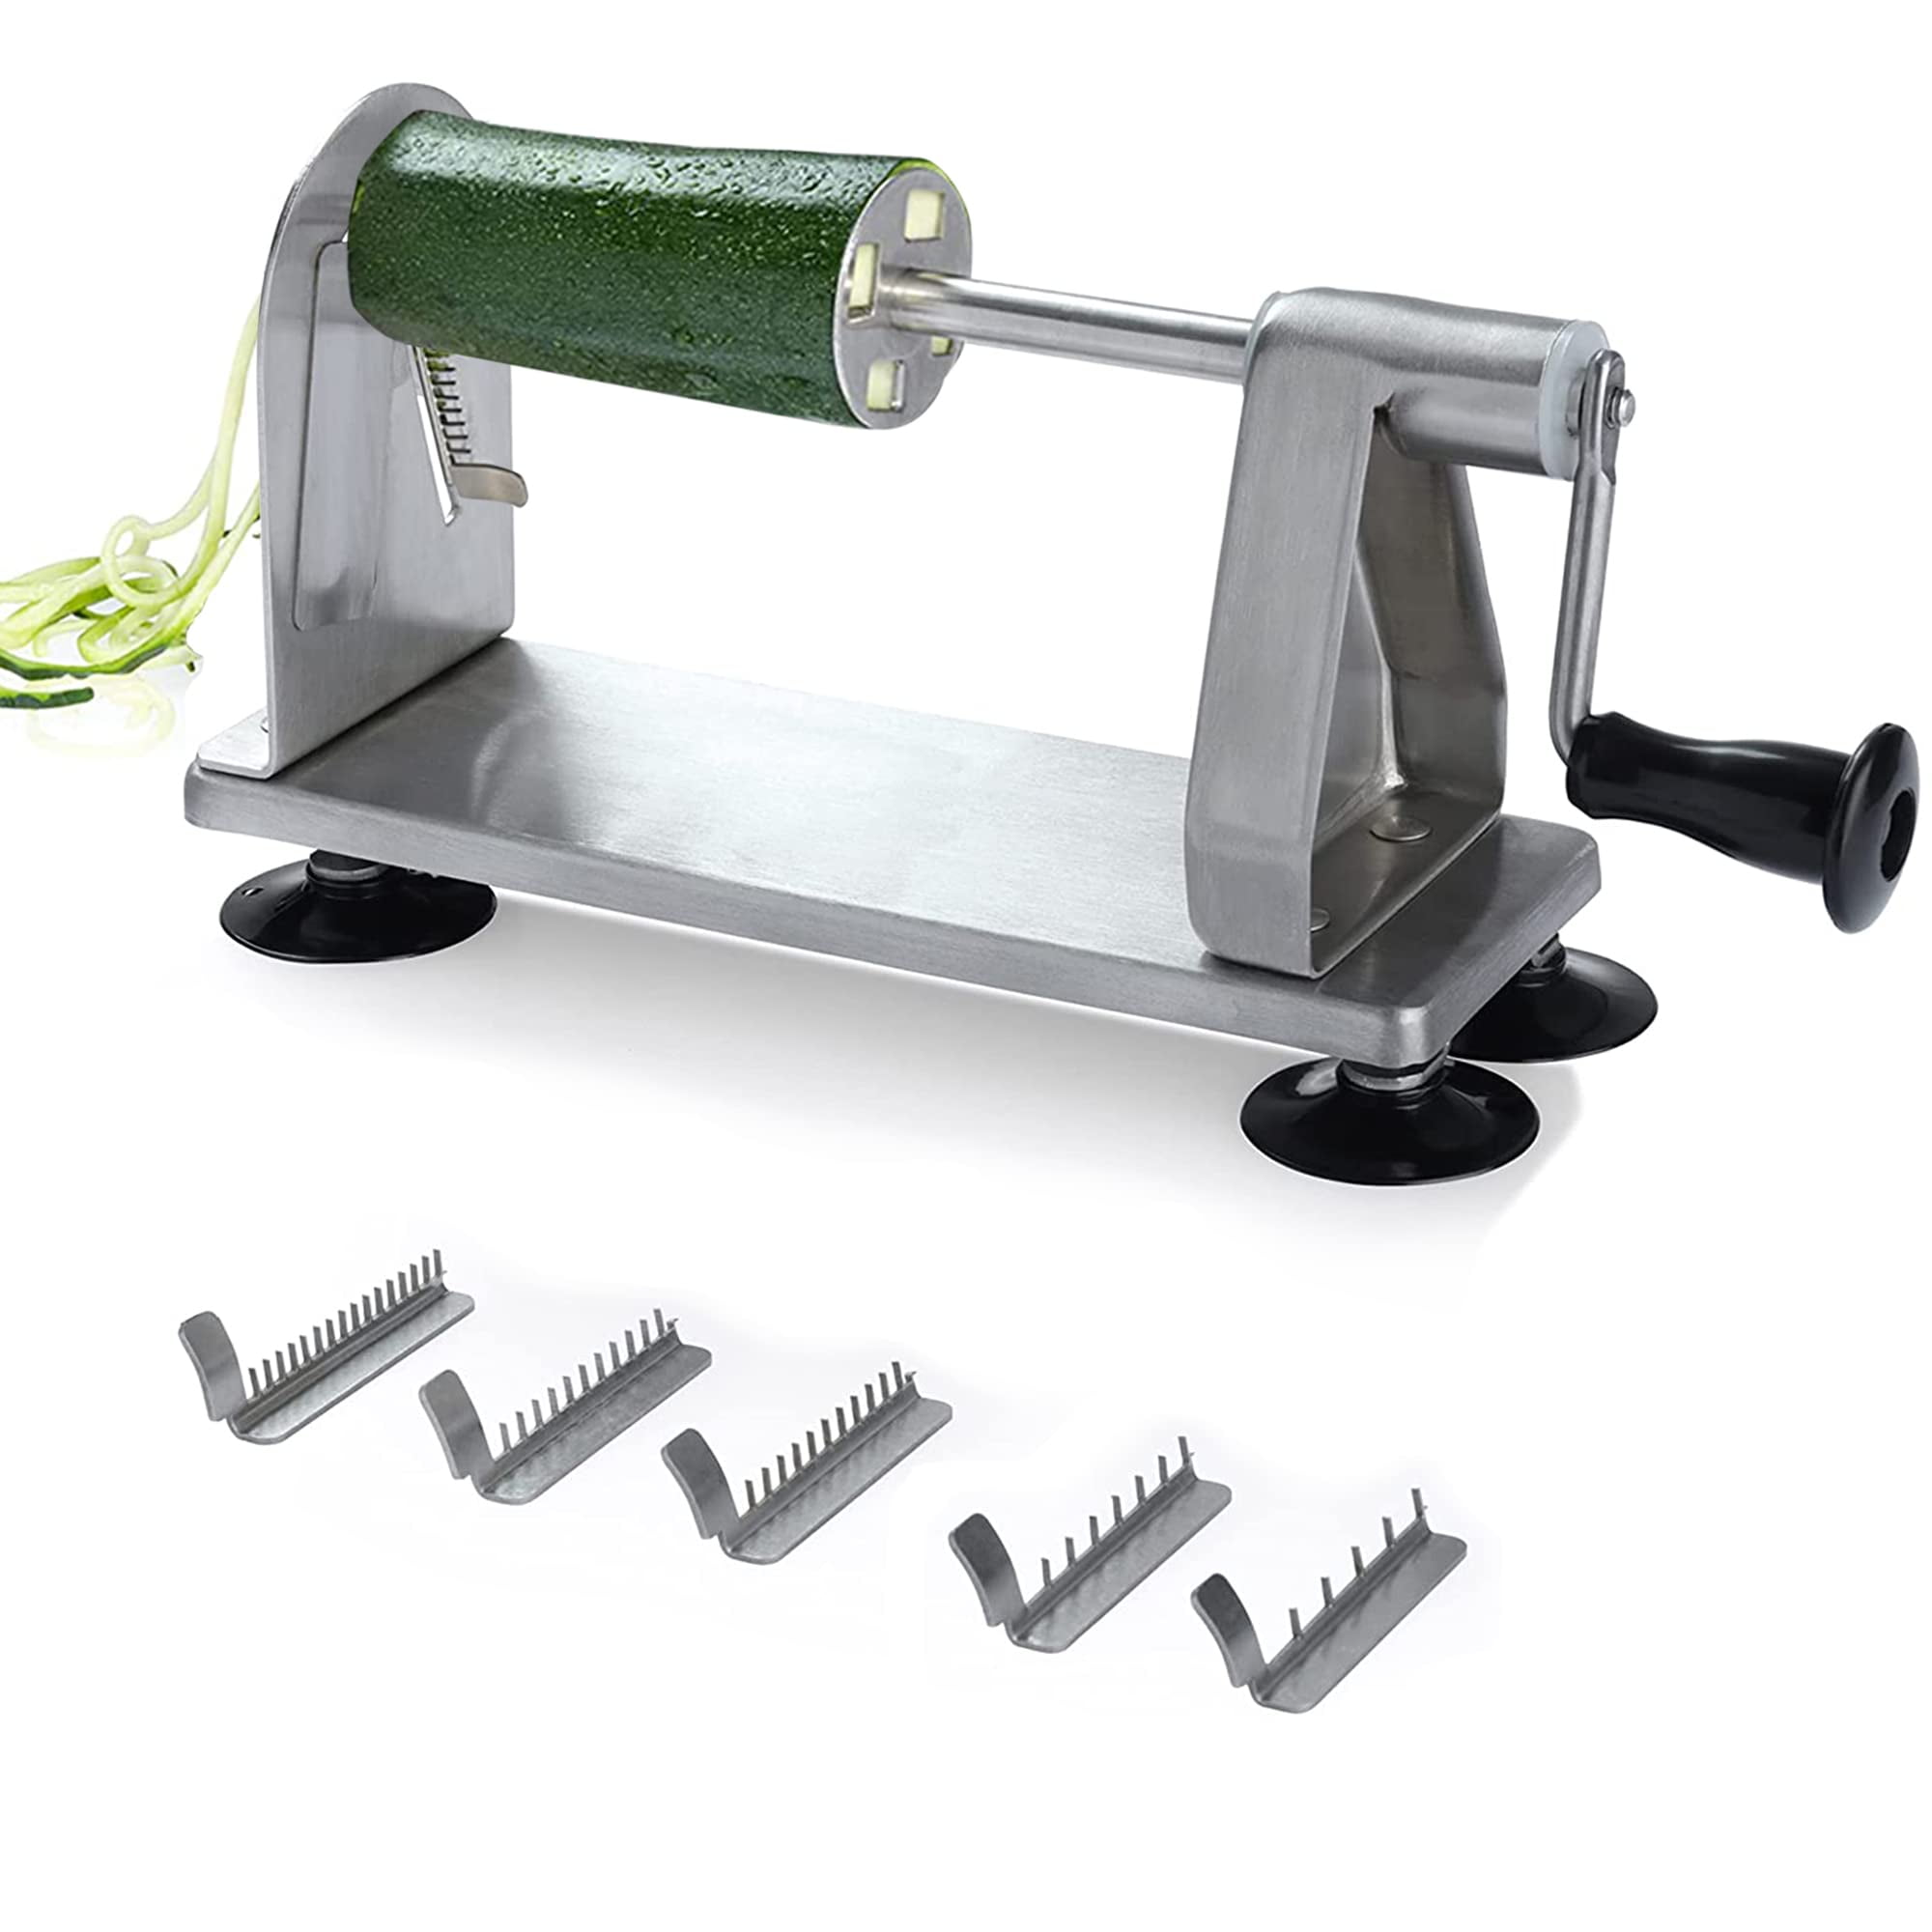  Charcoal Companion CC2032 Hot Dog Spiralizer Grilling Tool :  Patio, Lawn & Garden